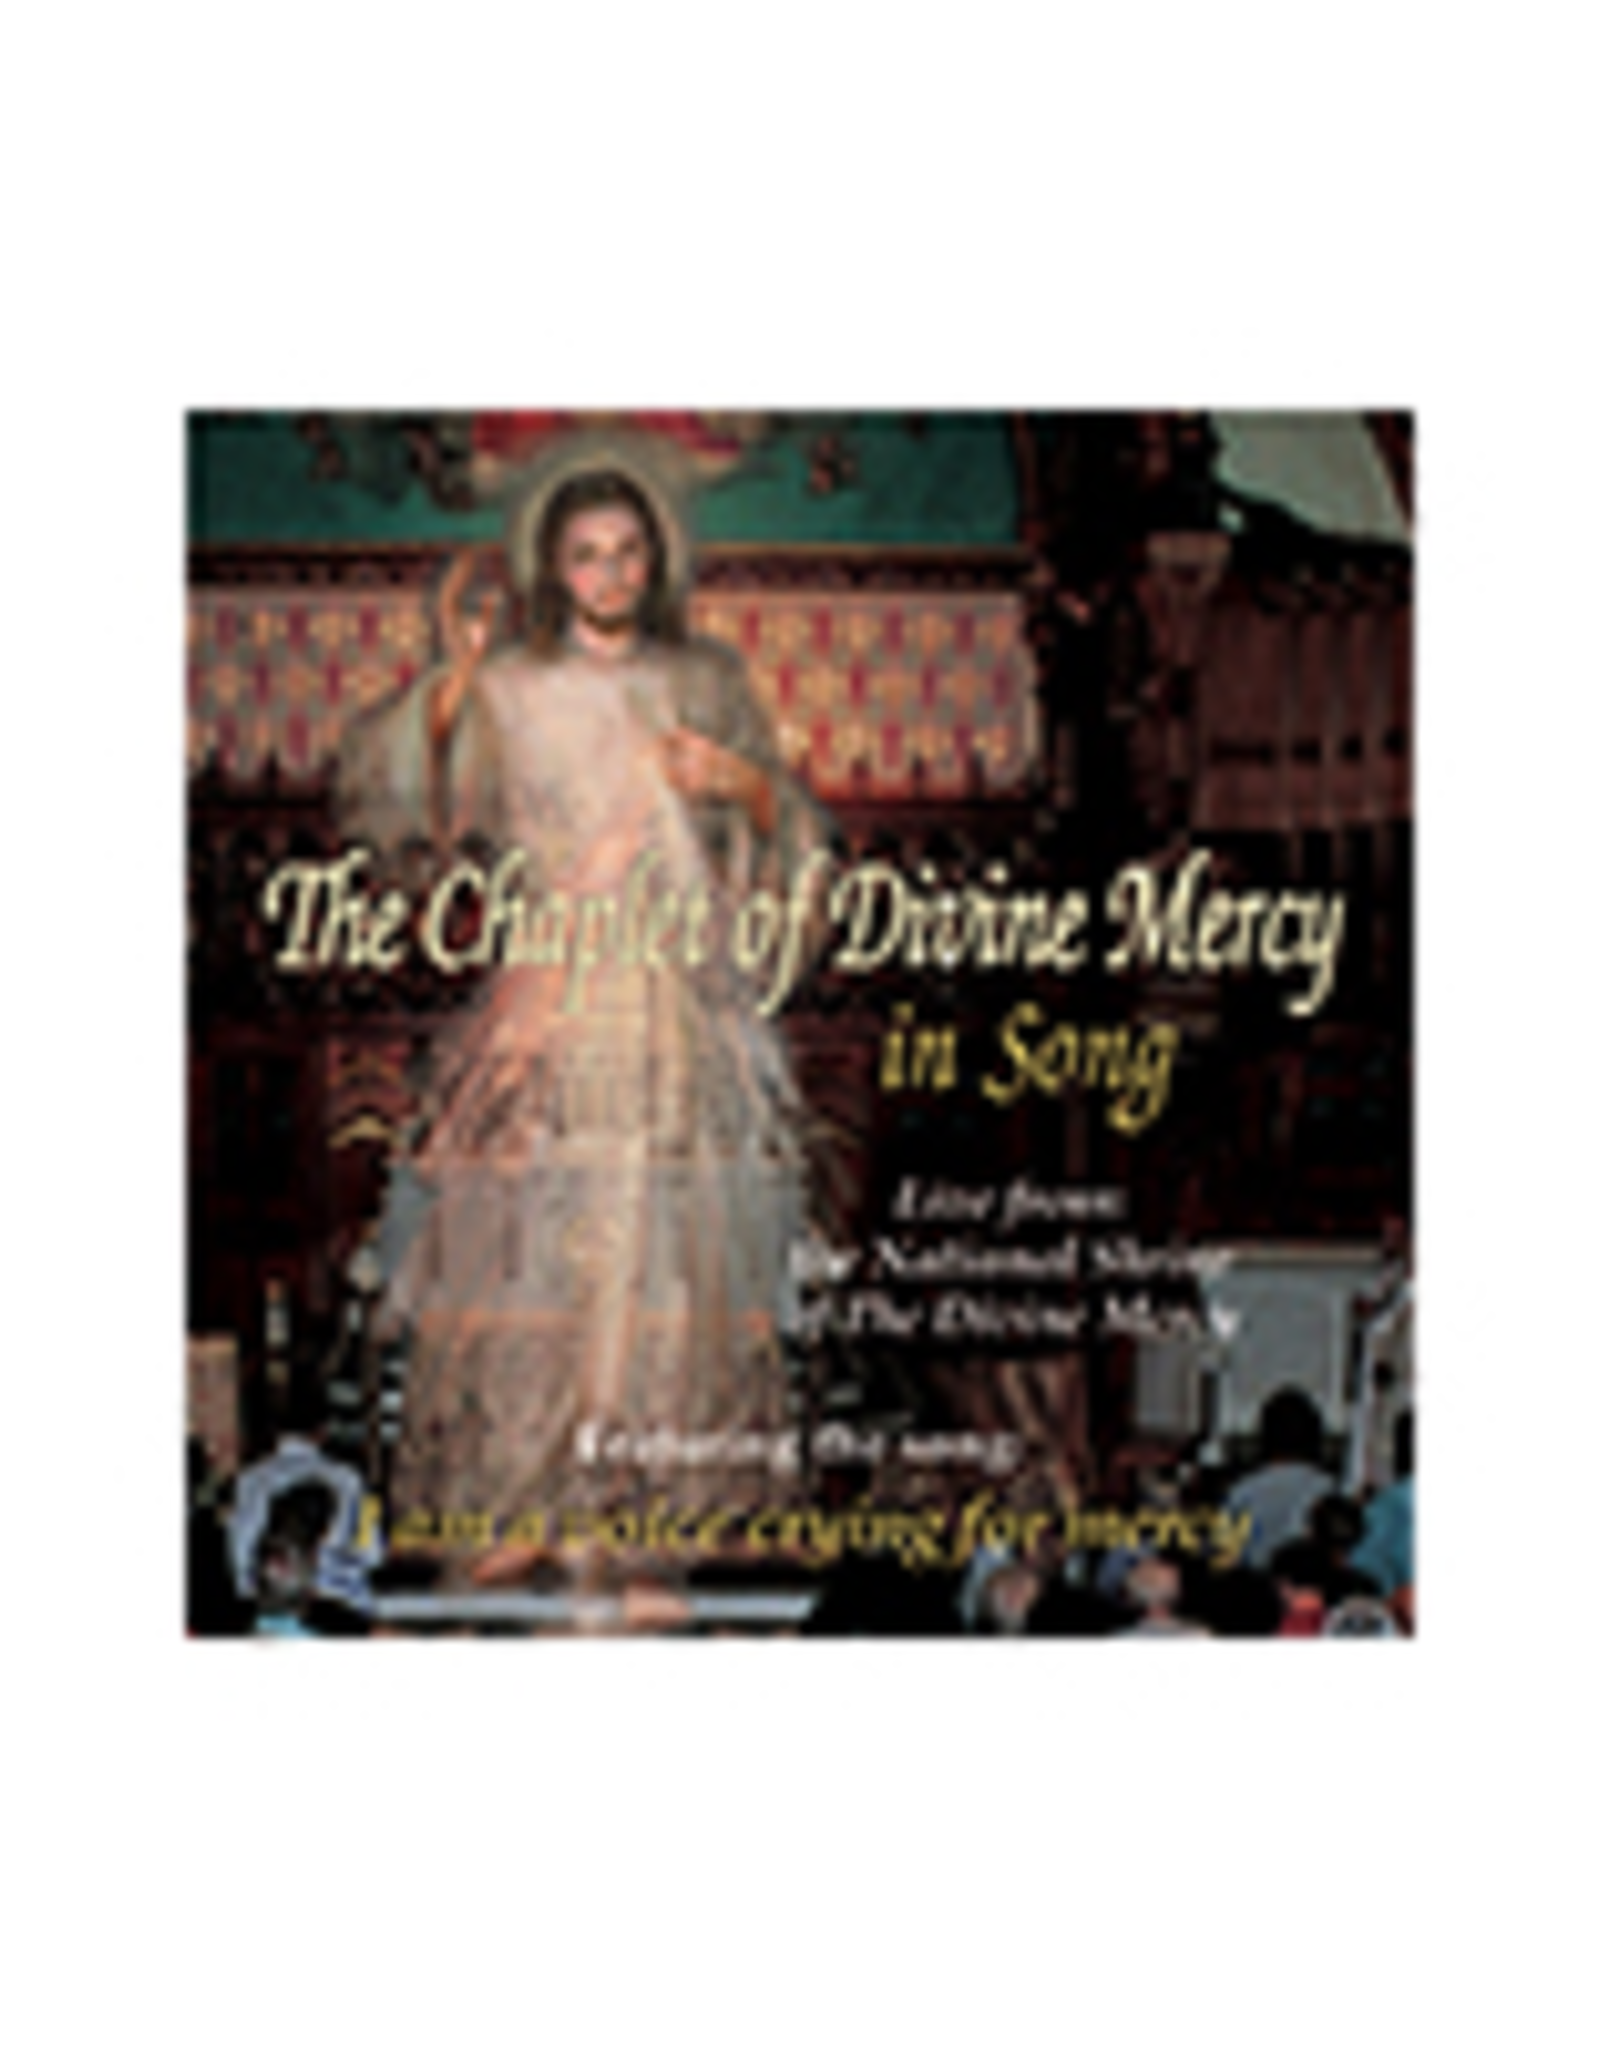 Marian Helpers Chaplet of Divine Mercy in Song CD, from Marian Press